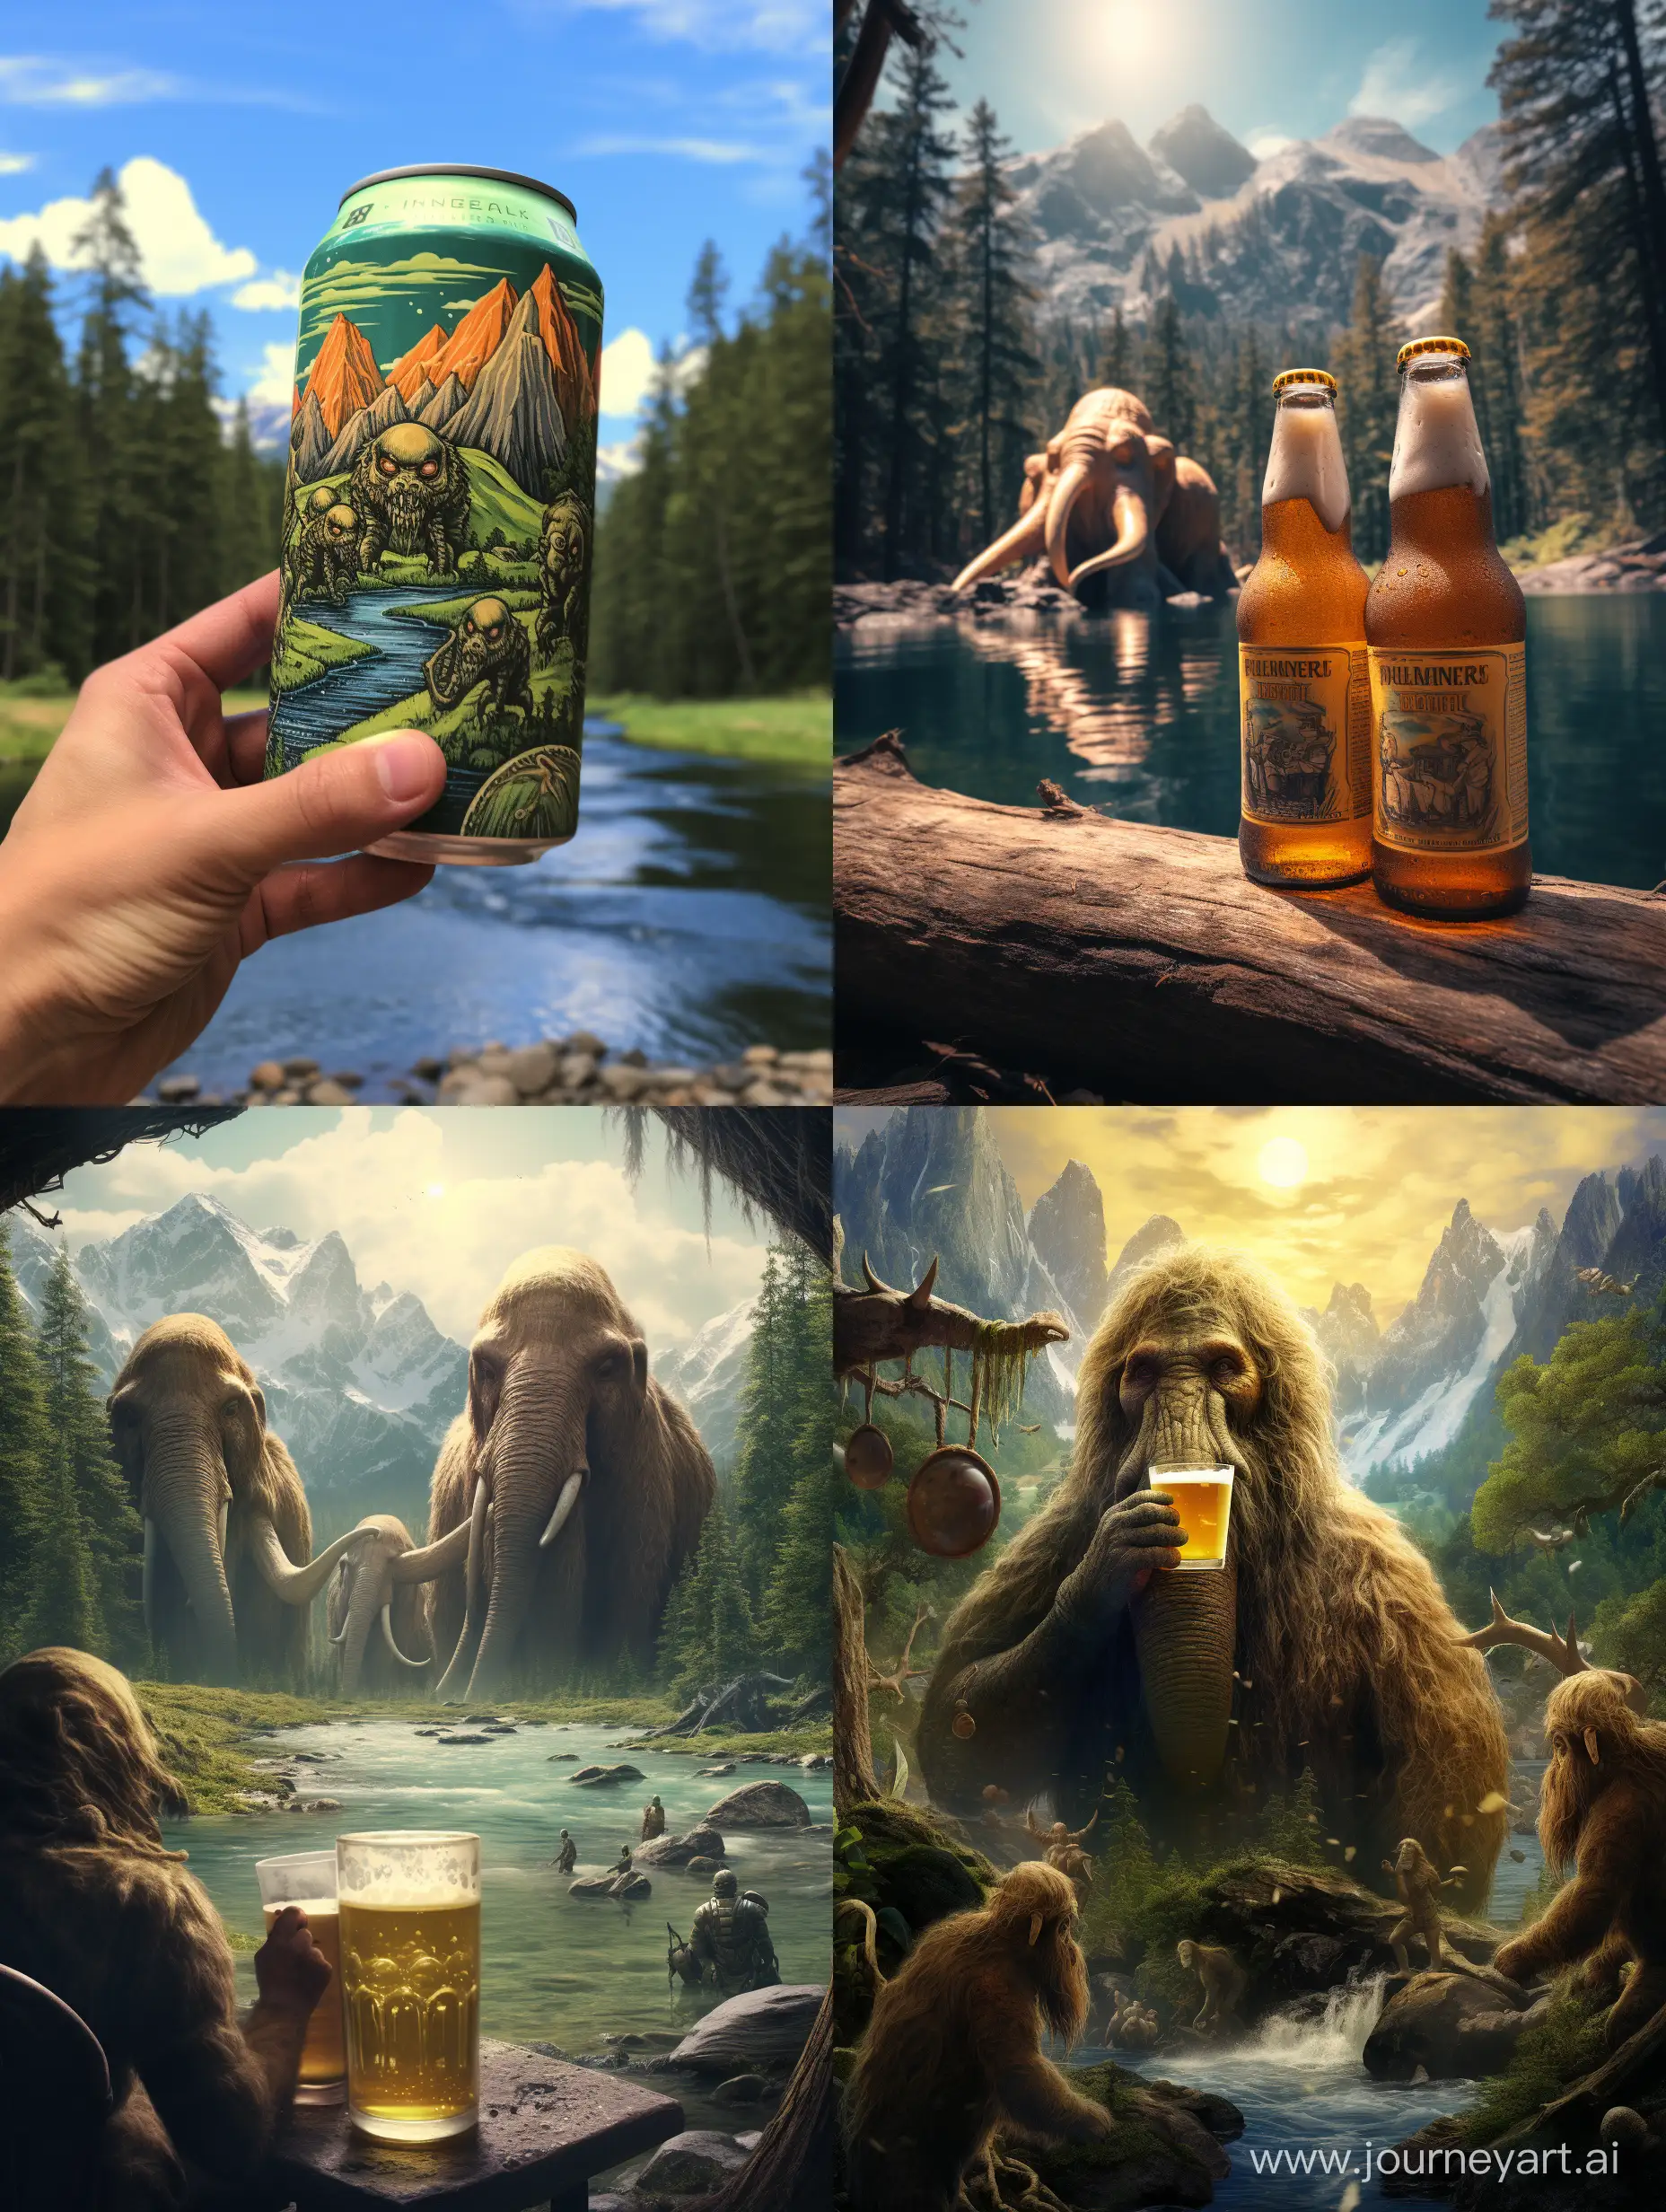 Surreal-Forest-Adventure-with-Mammoth-Aliens-and-River-View